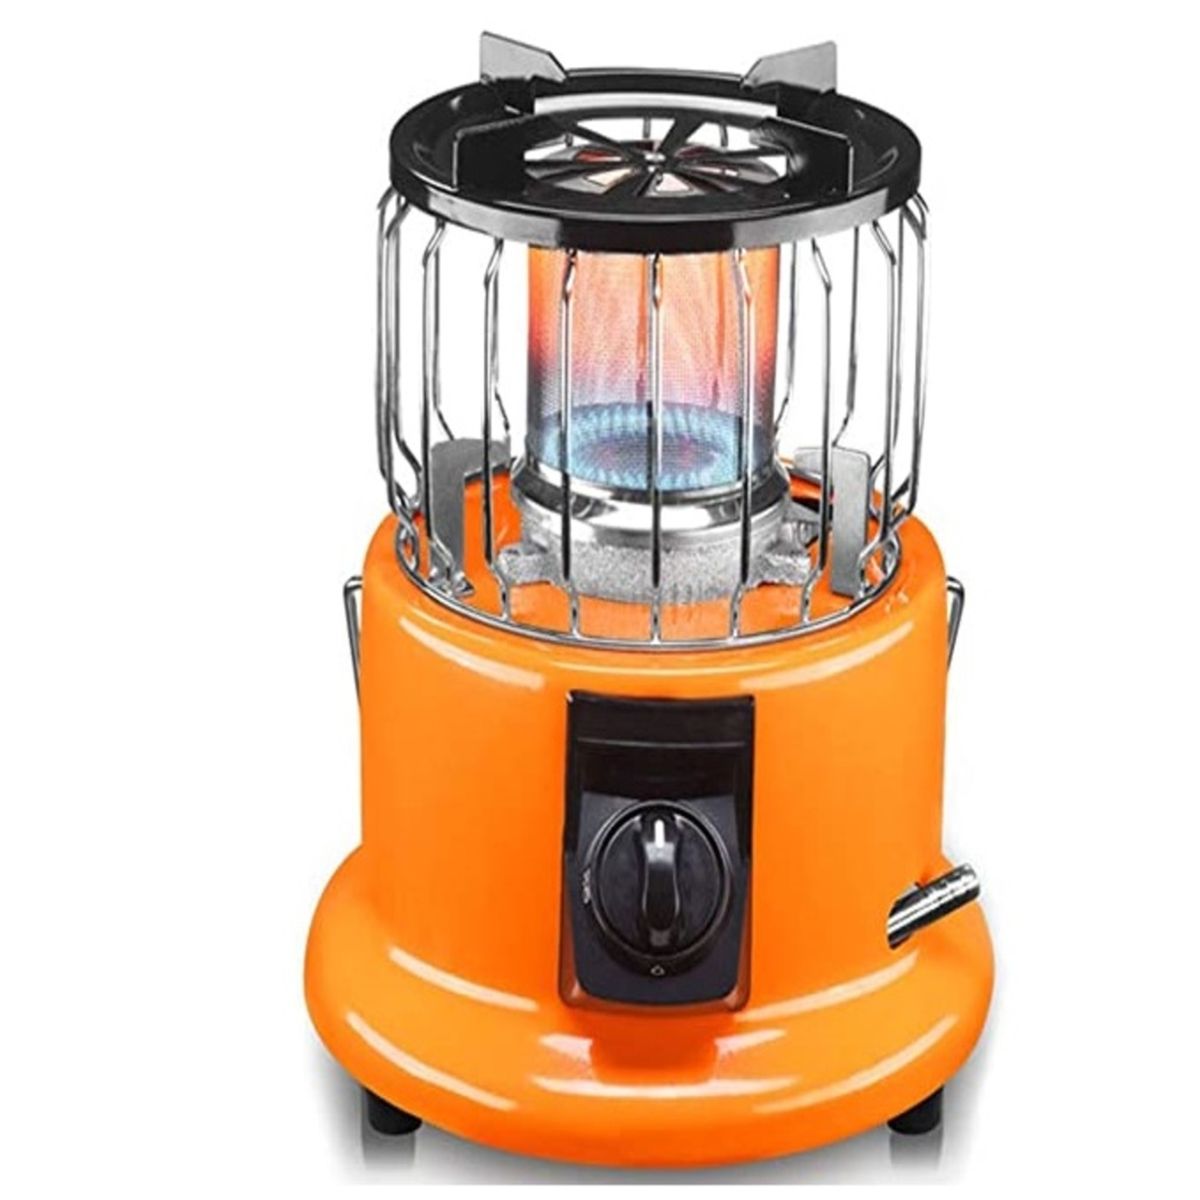 Dansup Multifunction Gas Heater And Stove | Shop Today. Get it Tomorrow ...